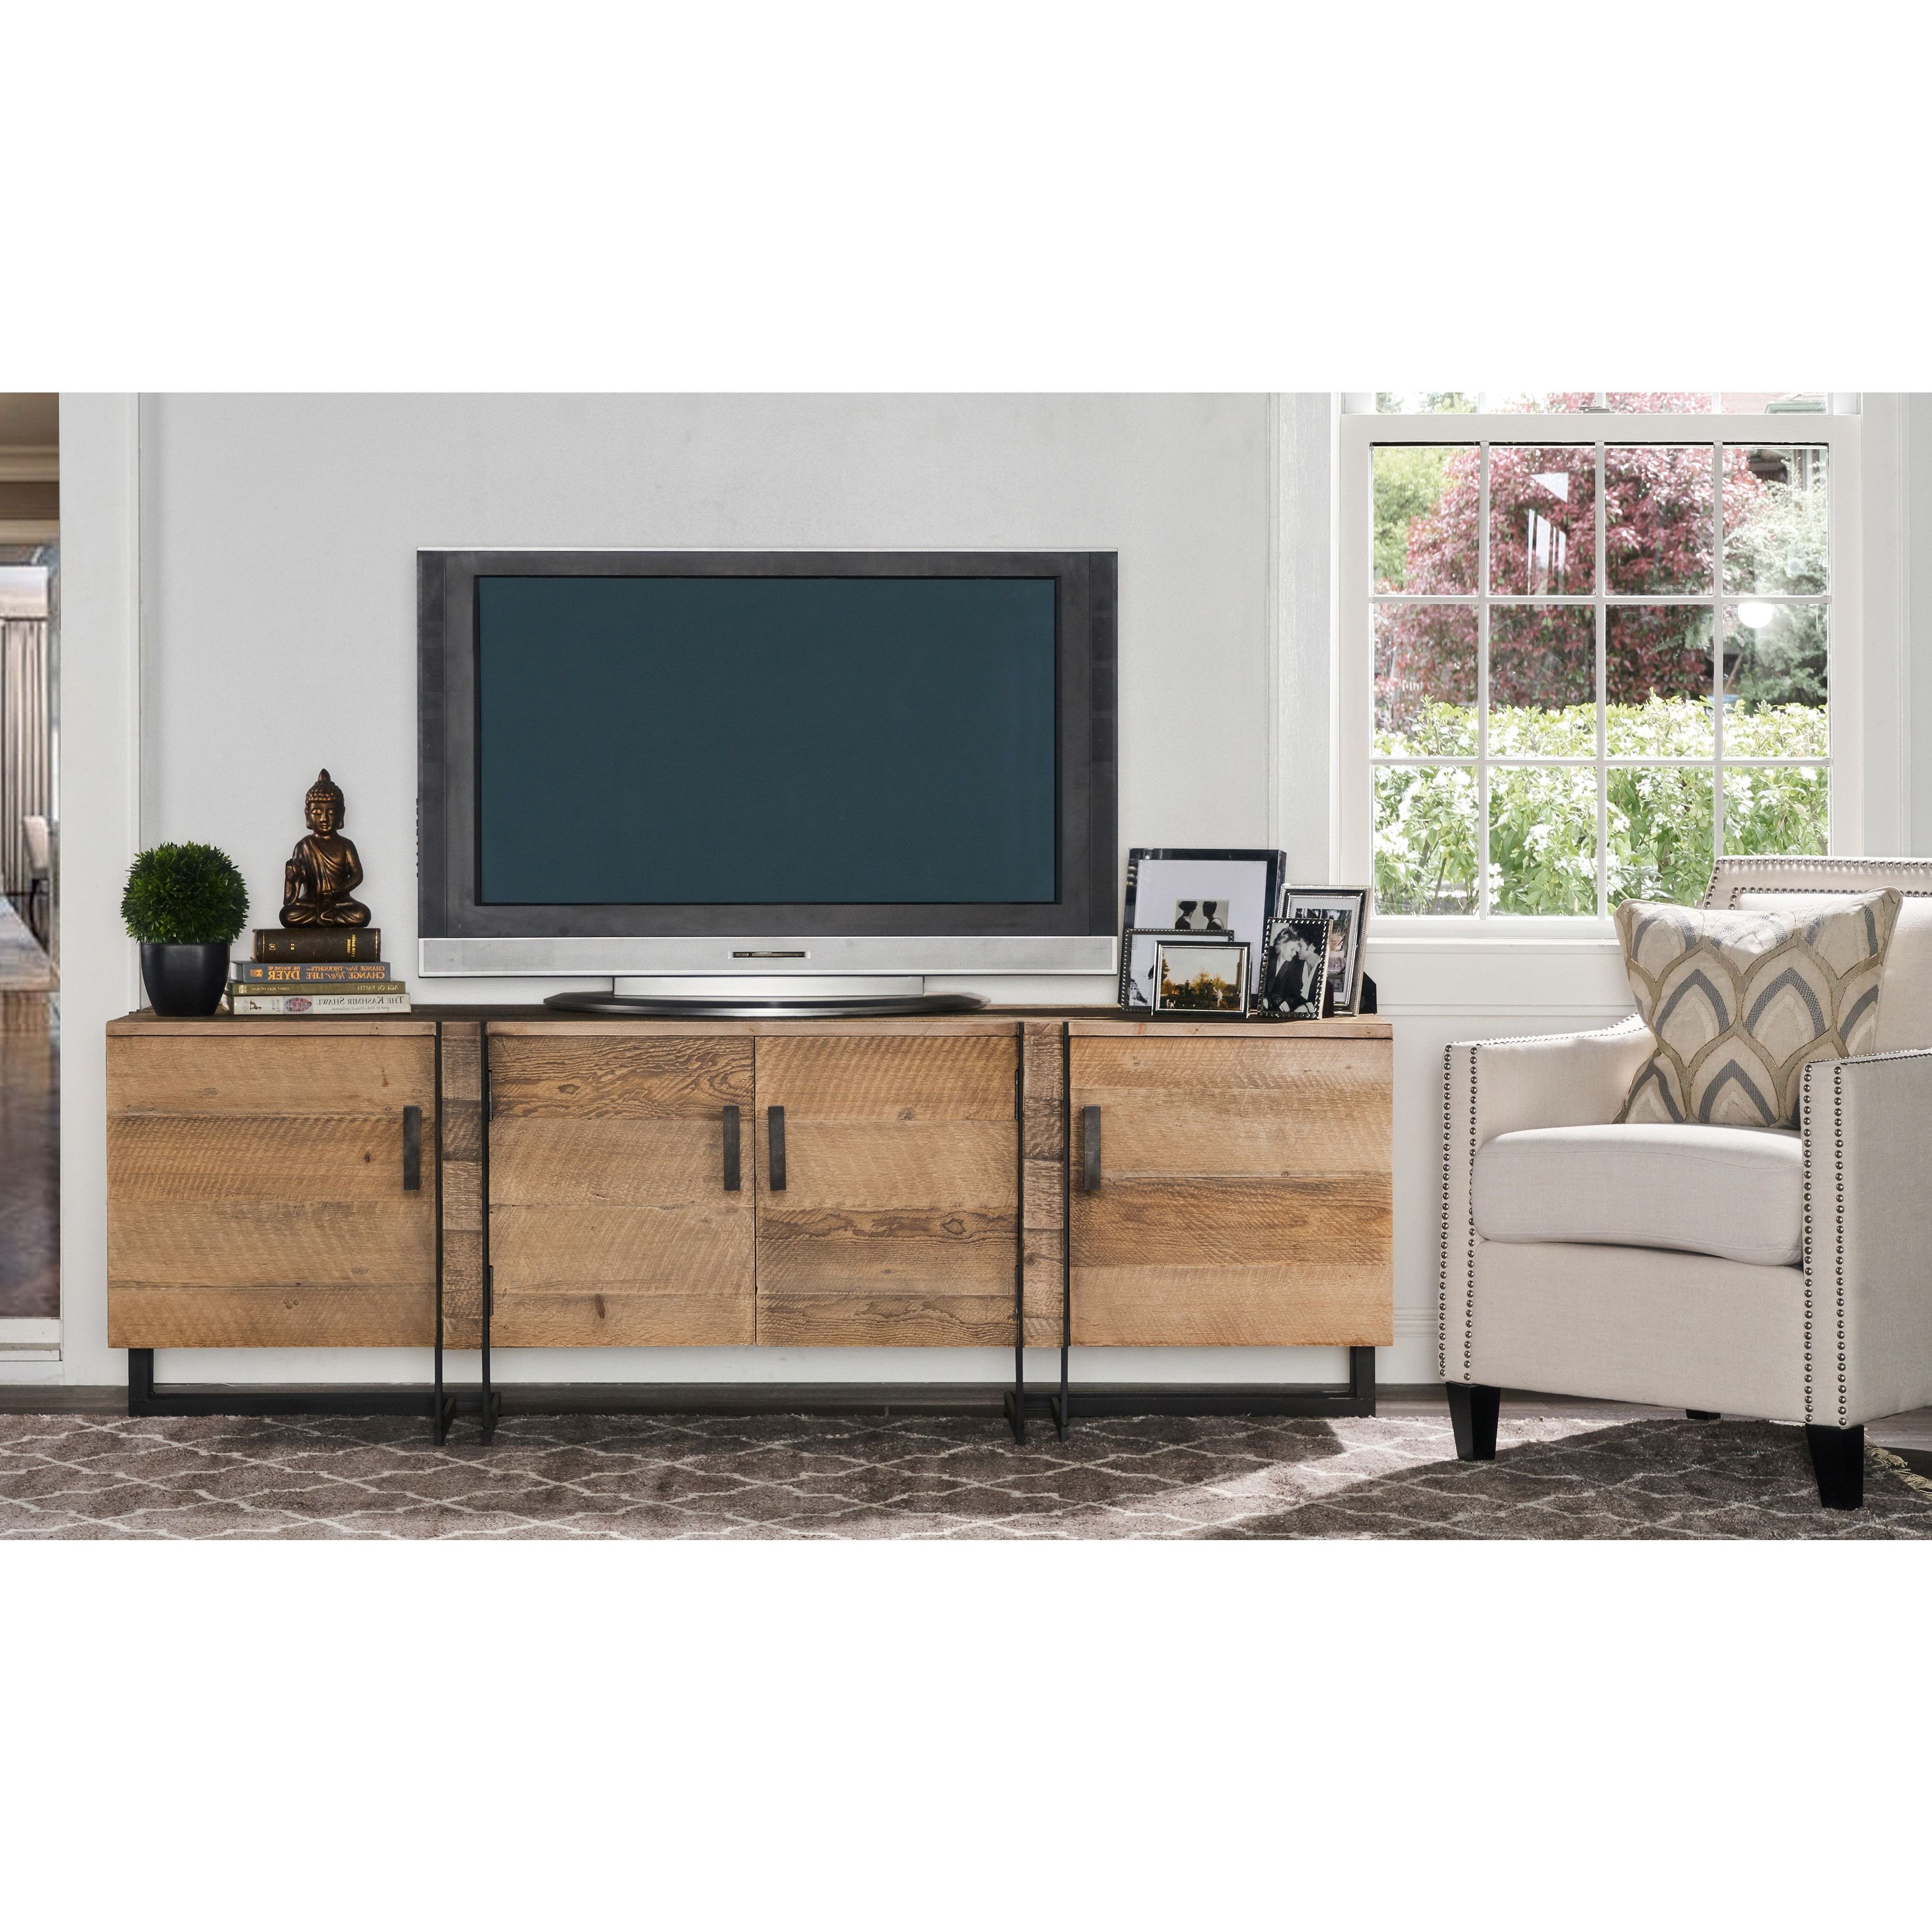 Favorite Pine Tv Cabinets For Martine Reclaimed Pine 4 Door Tv Standkosas Home – 26hx79wx21d (View 20 of 20)